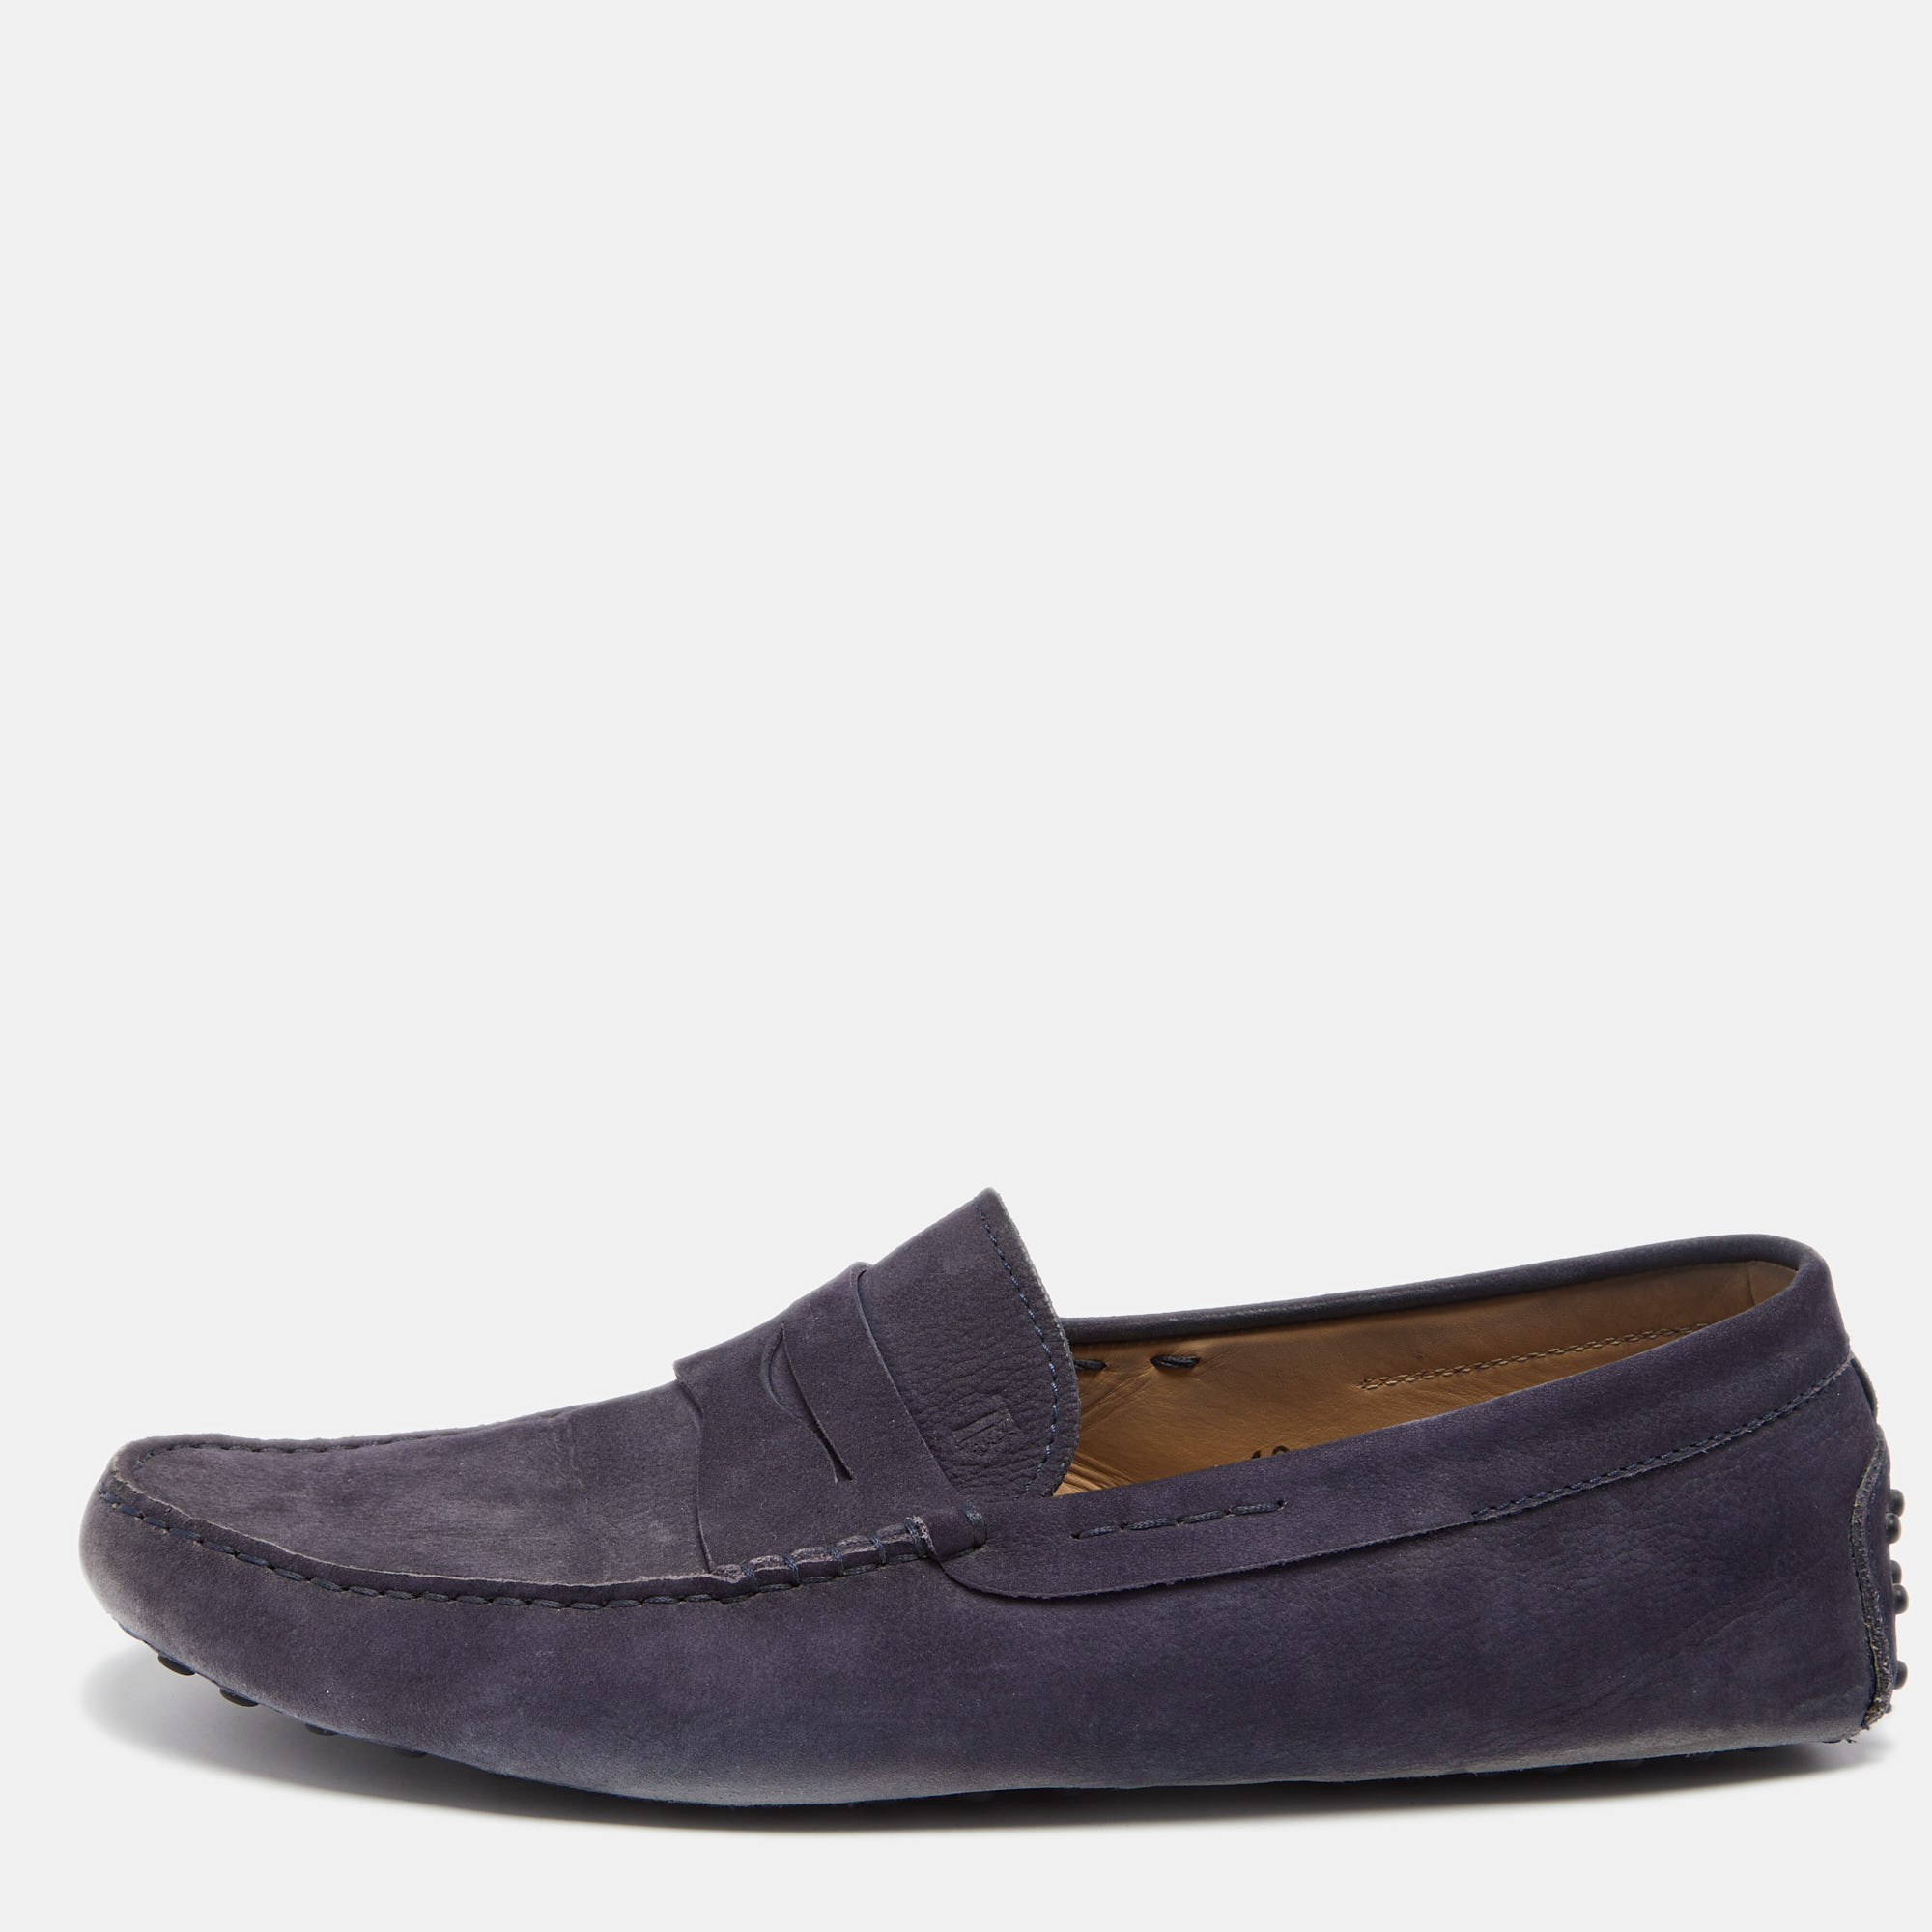 Tod's Purple Suede Slip On Loafers Size 44.5